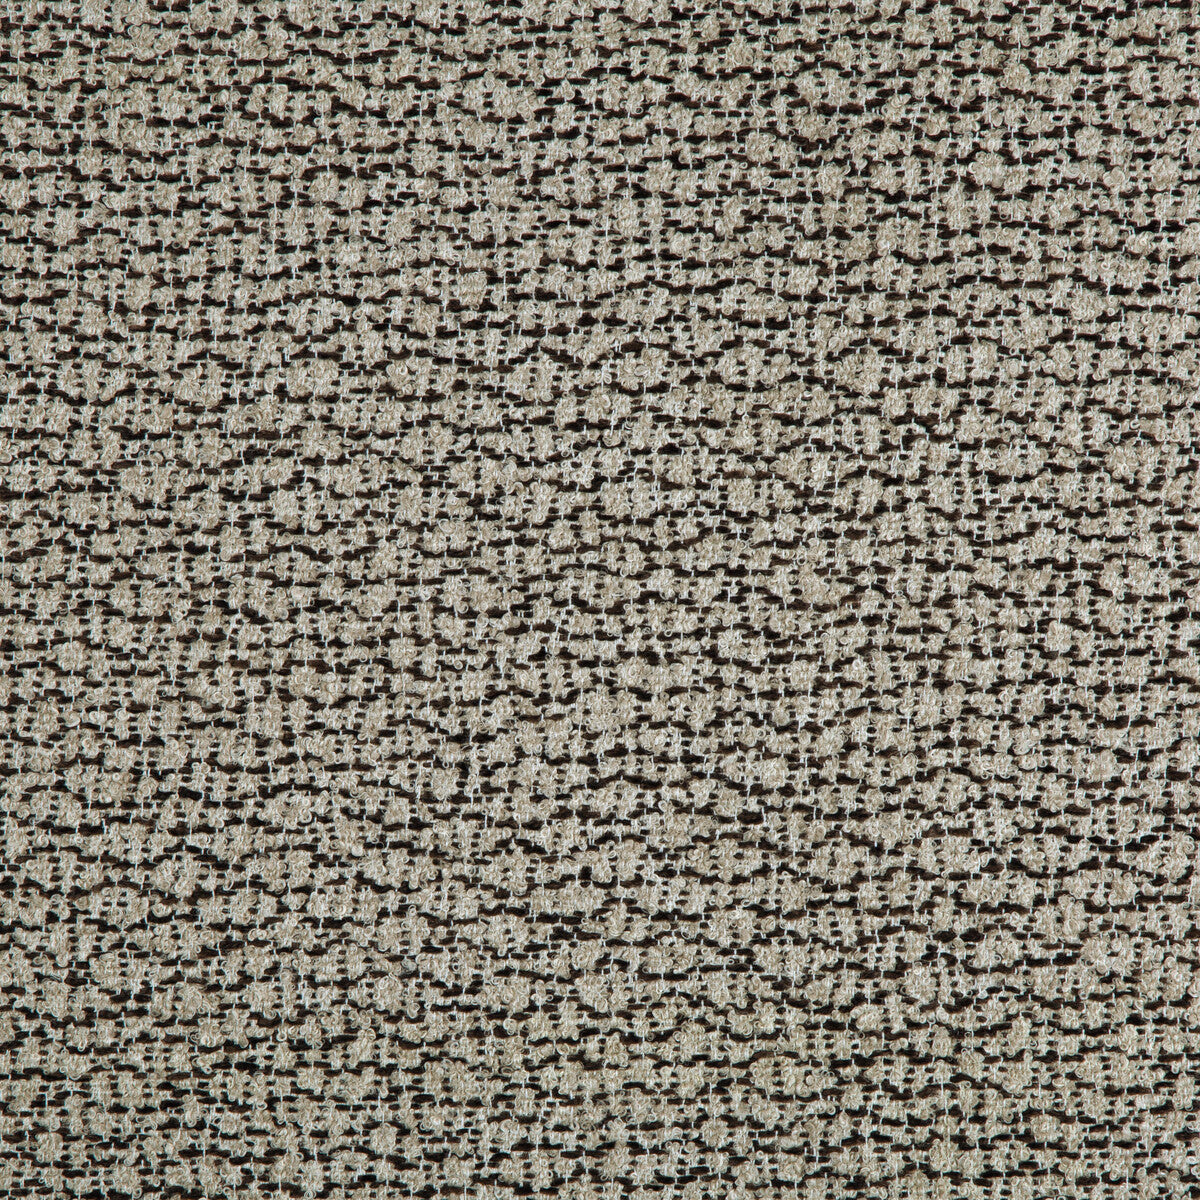 Rios fabric in shadow color - pattern GWF-3782.8106.0 - by Lee Jofa Modern in the Kelly Wearstler Oculum Indoor/Outdoor collection